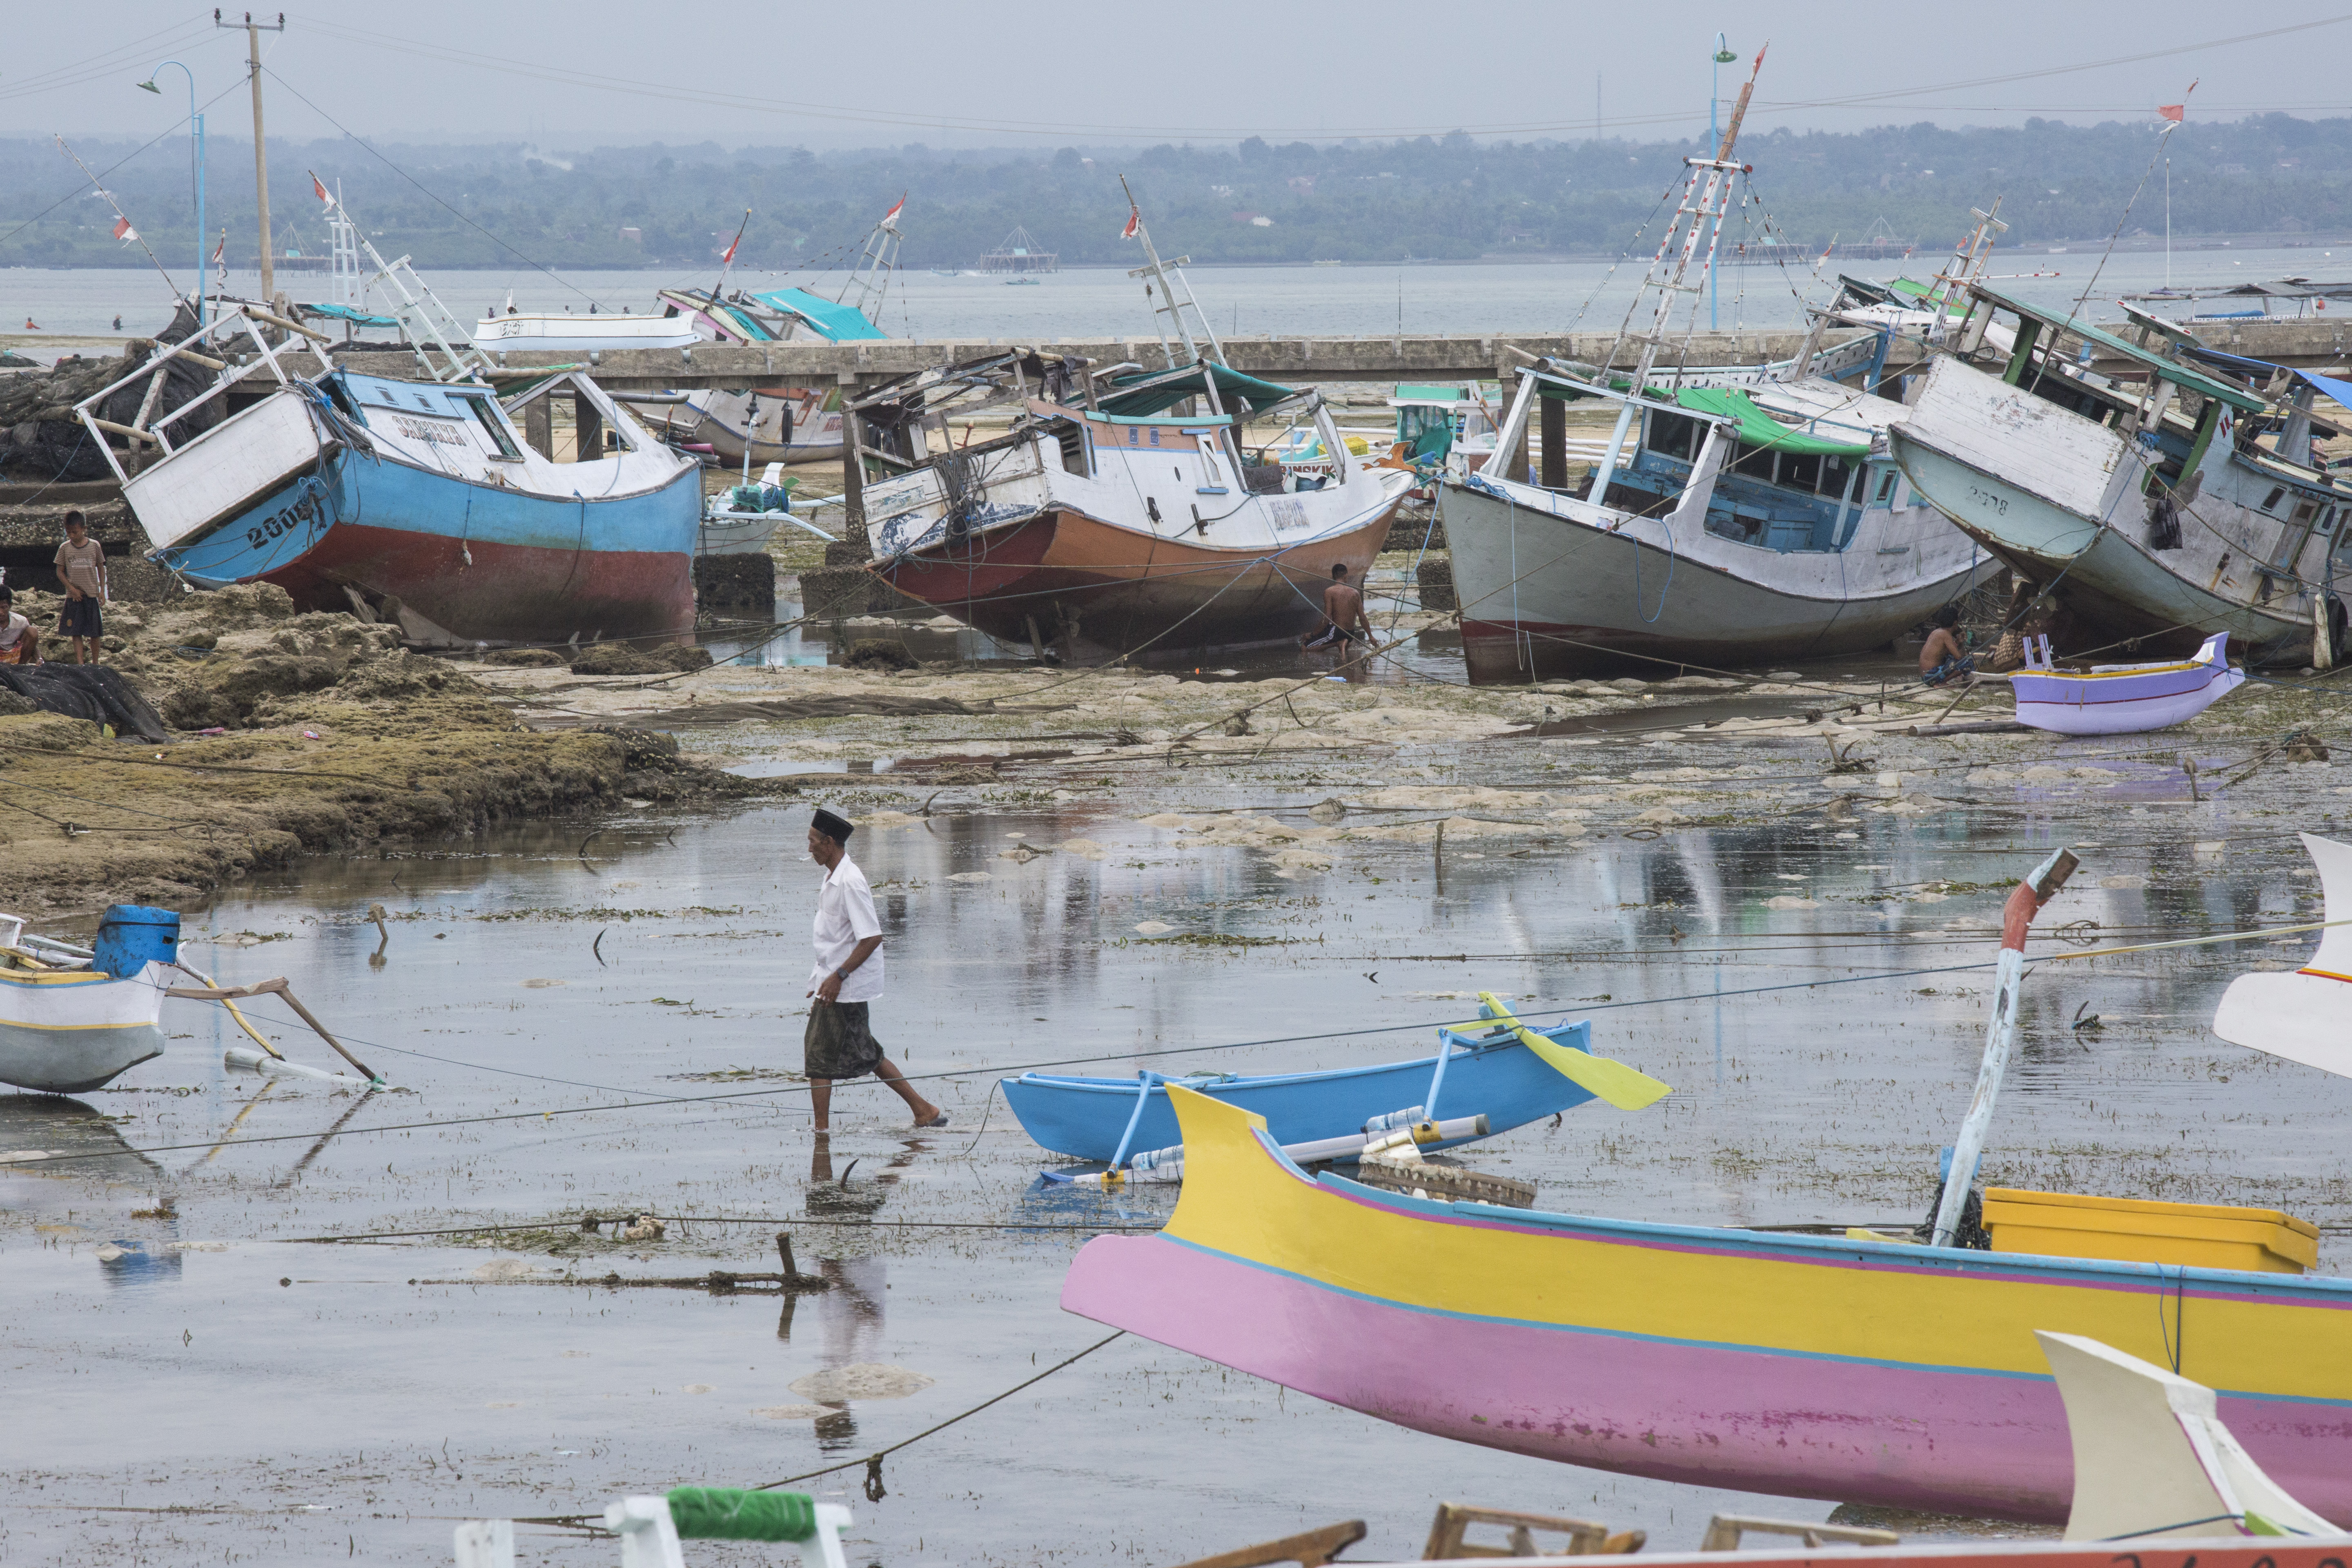 Fishing boats docked at the island jetty where many villagers continue to reply on shark fishing as the main source of income for their families.